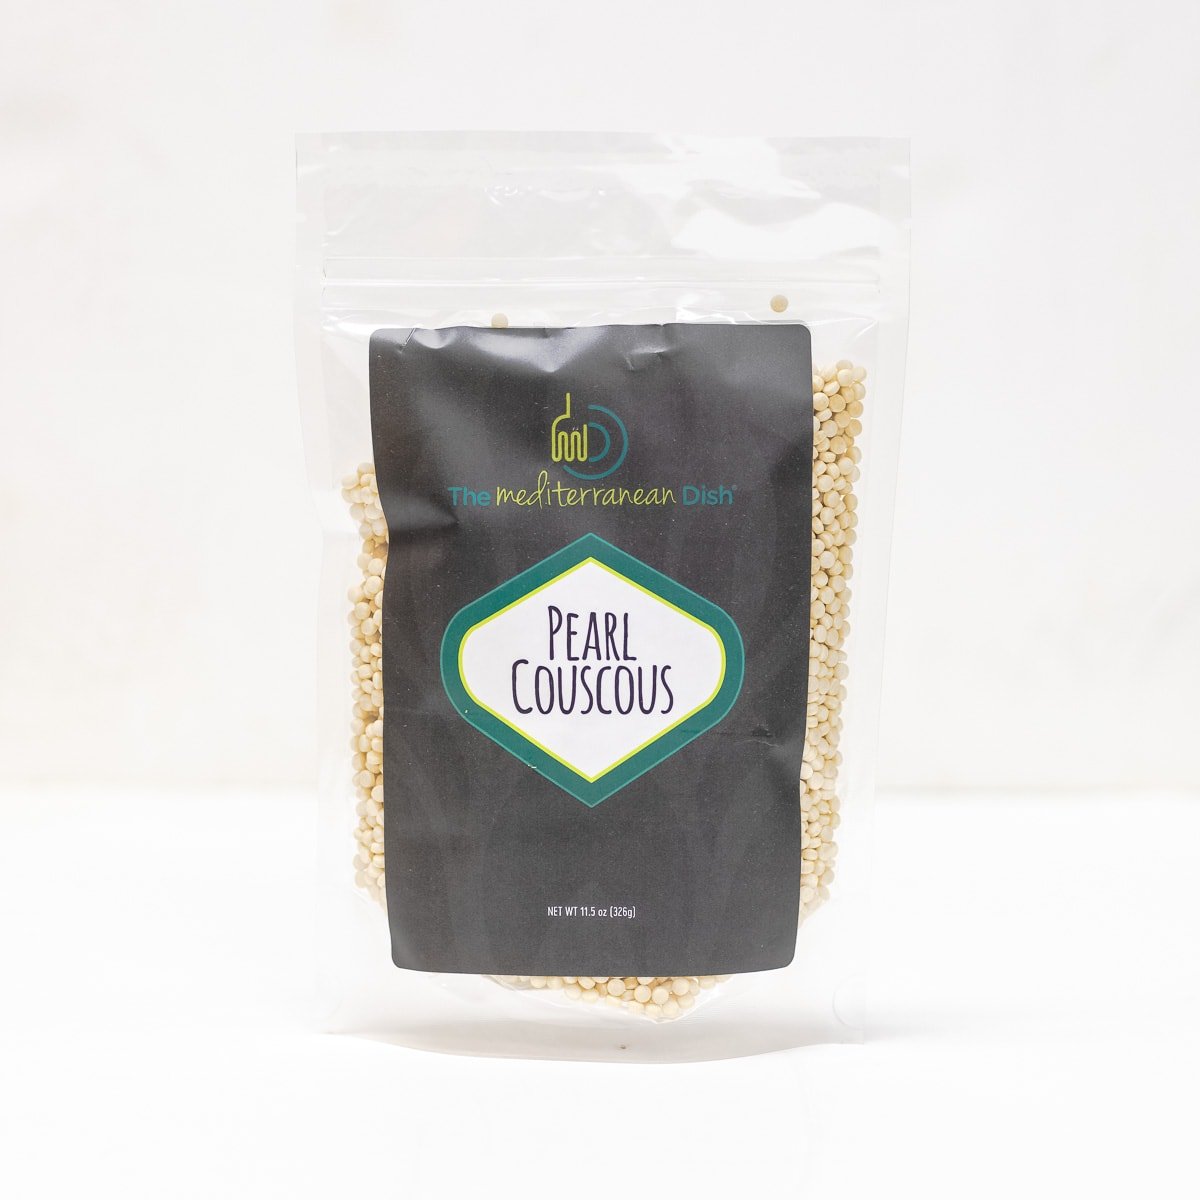 A bag of pearl couscous